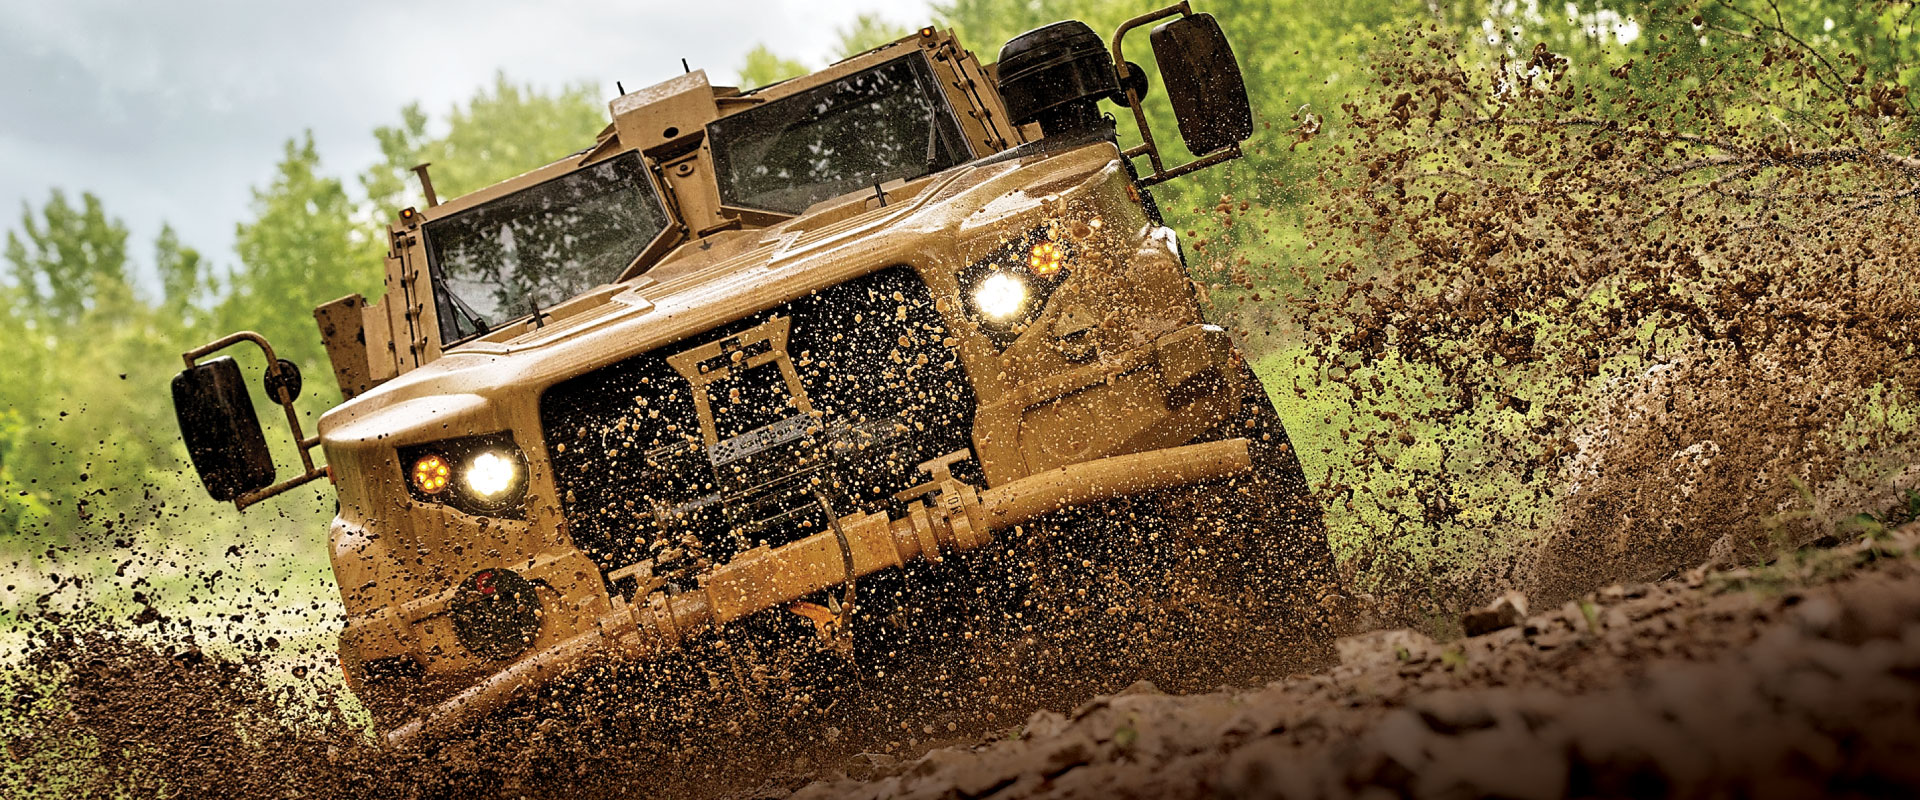 Wheeled defense vehicle going through a stream of mud.